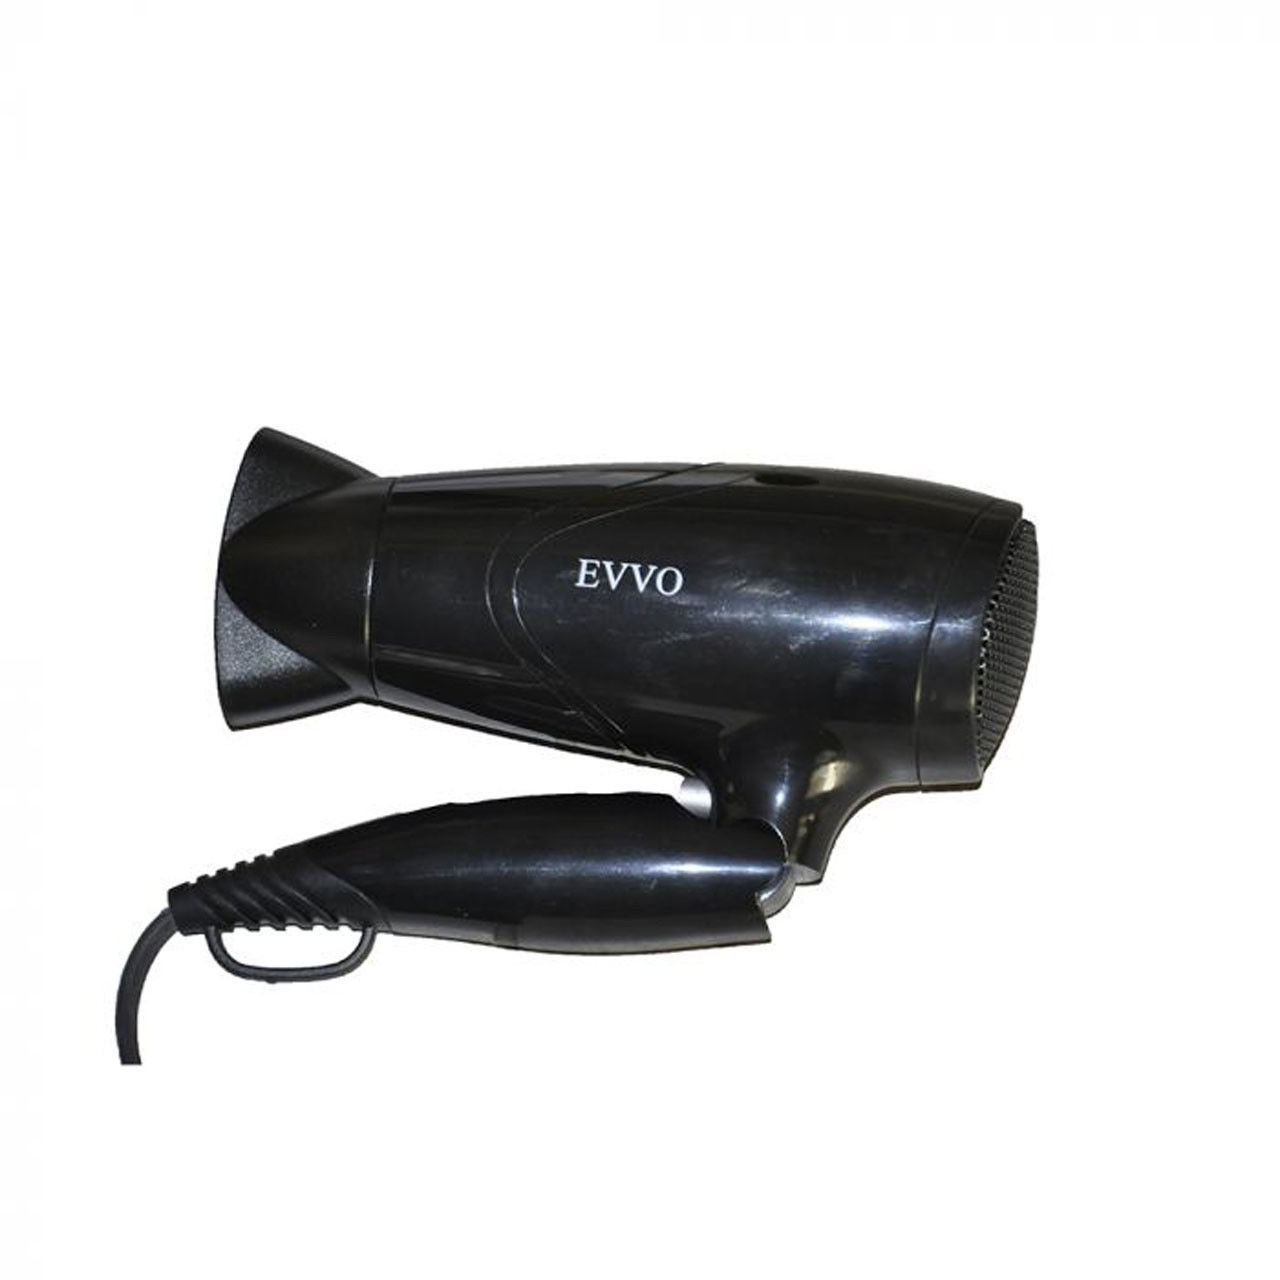 Does the 1600 watt hair dryer offer quick drying efficiency?